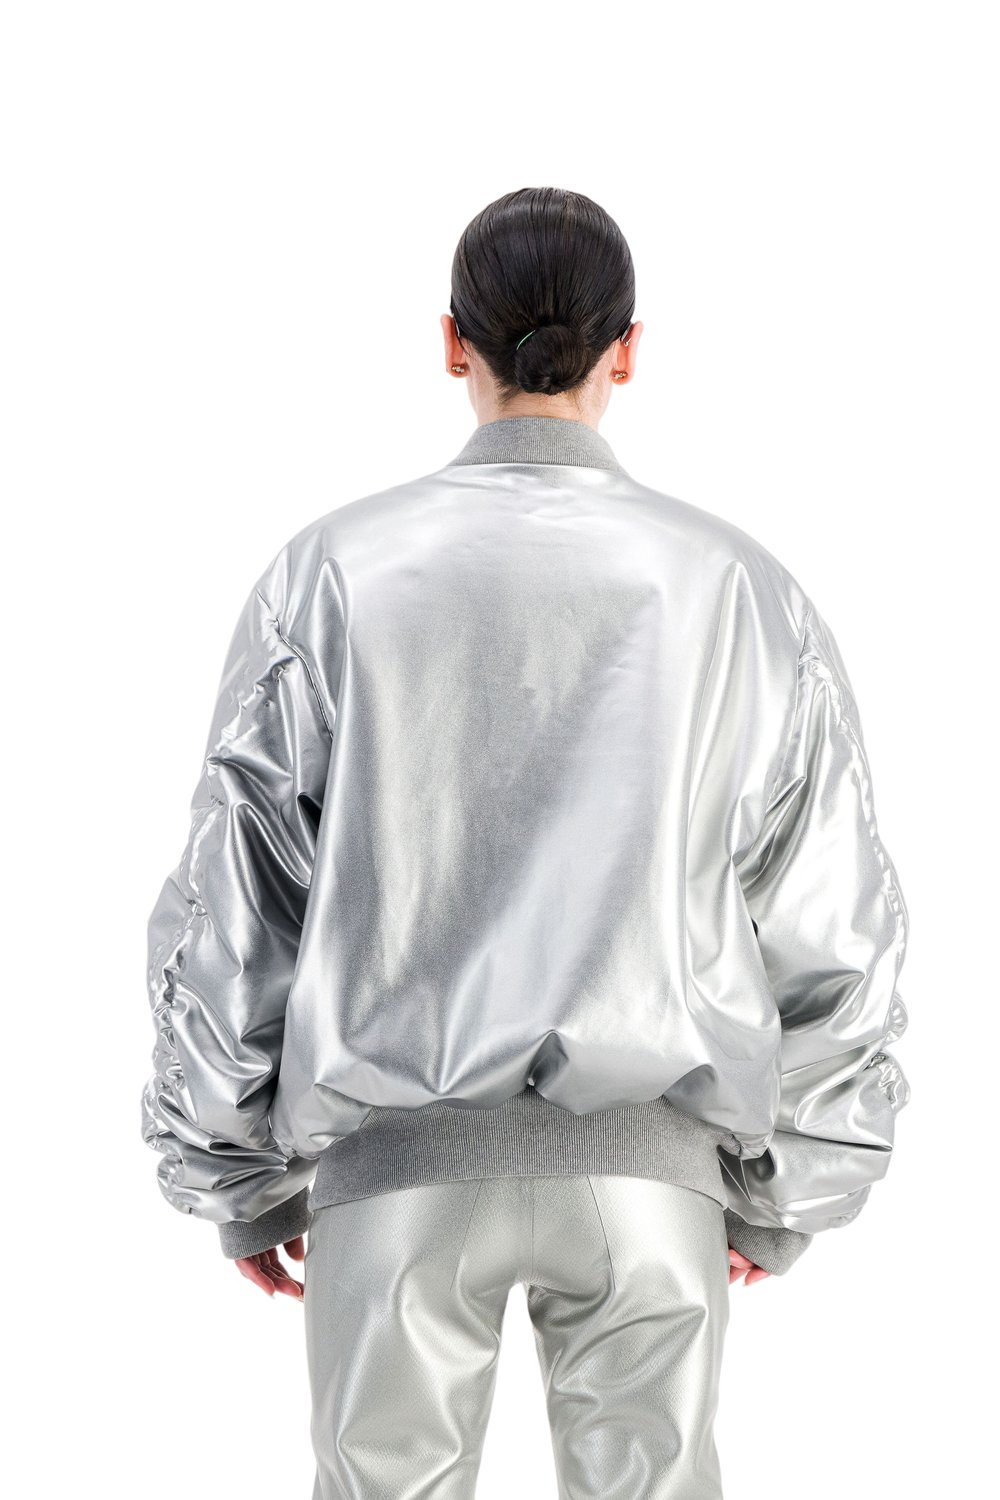 LATEX INFLATABLE PUFFER JACKET — AVELLANO | Official website